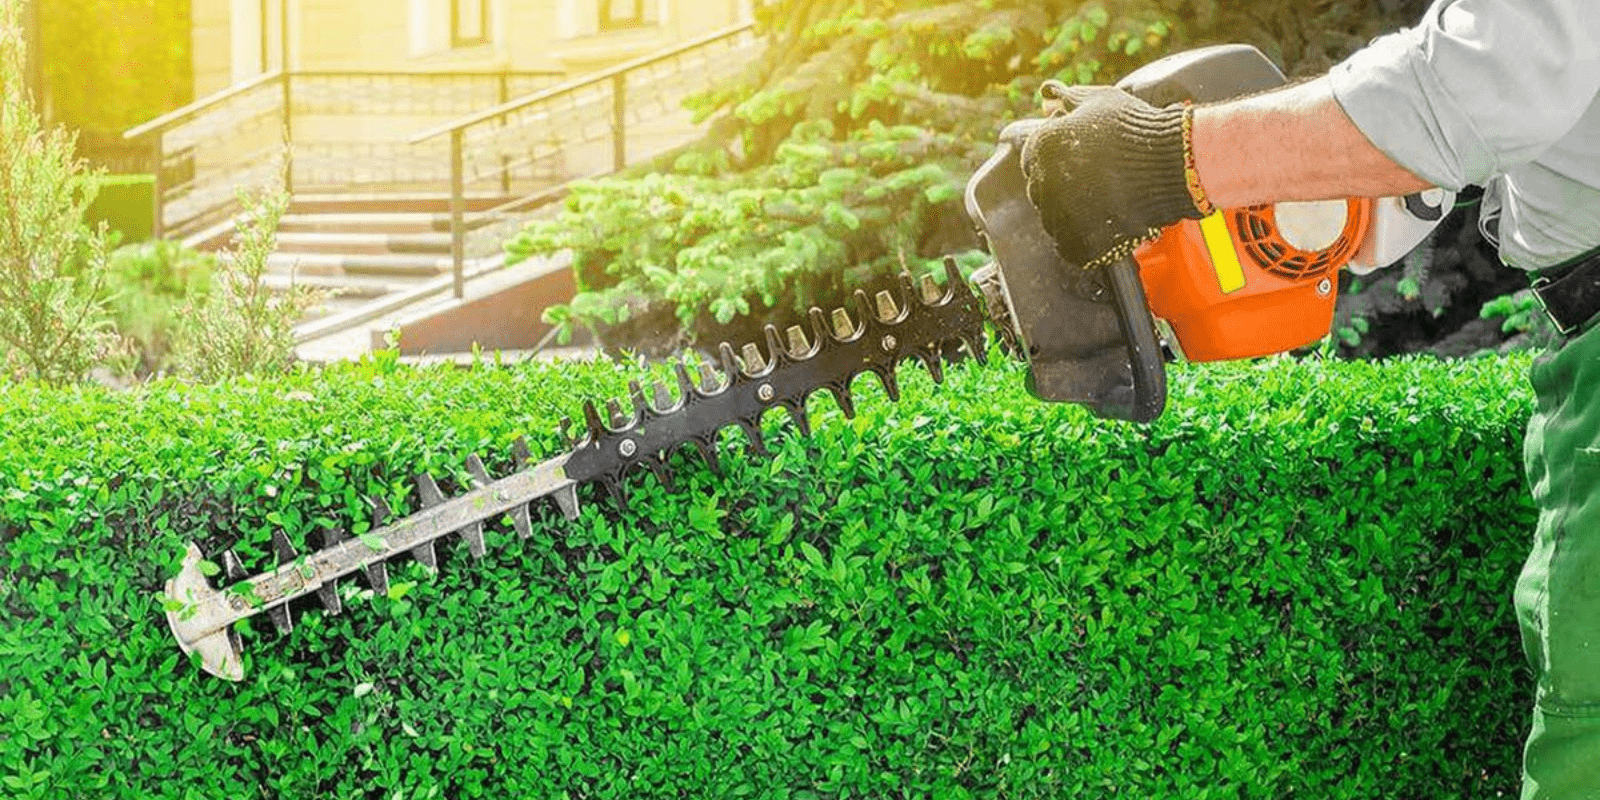 Best gas hedge trimmers on amazon 1